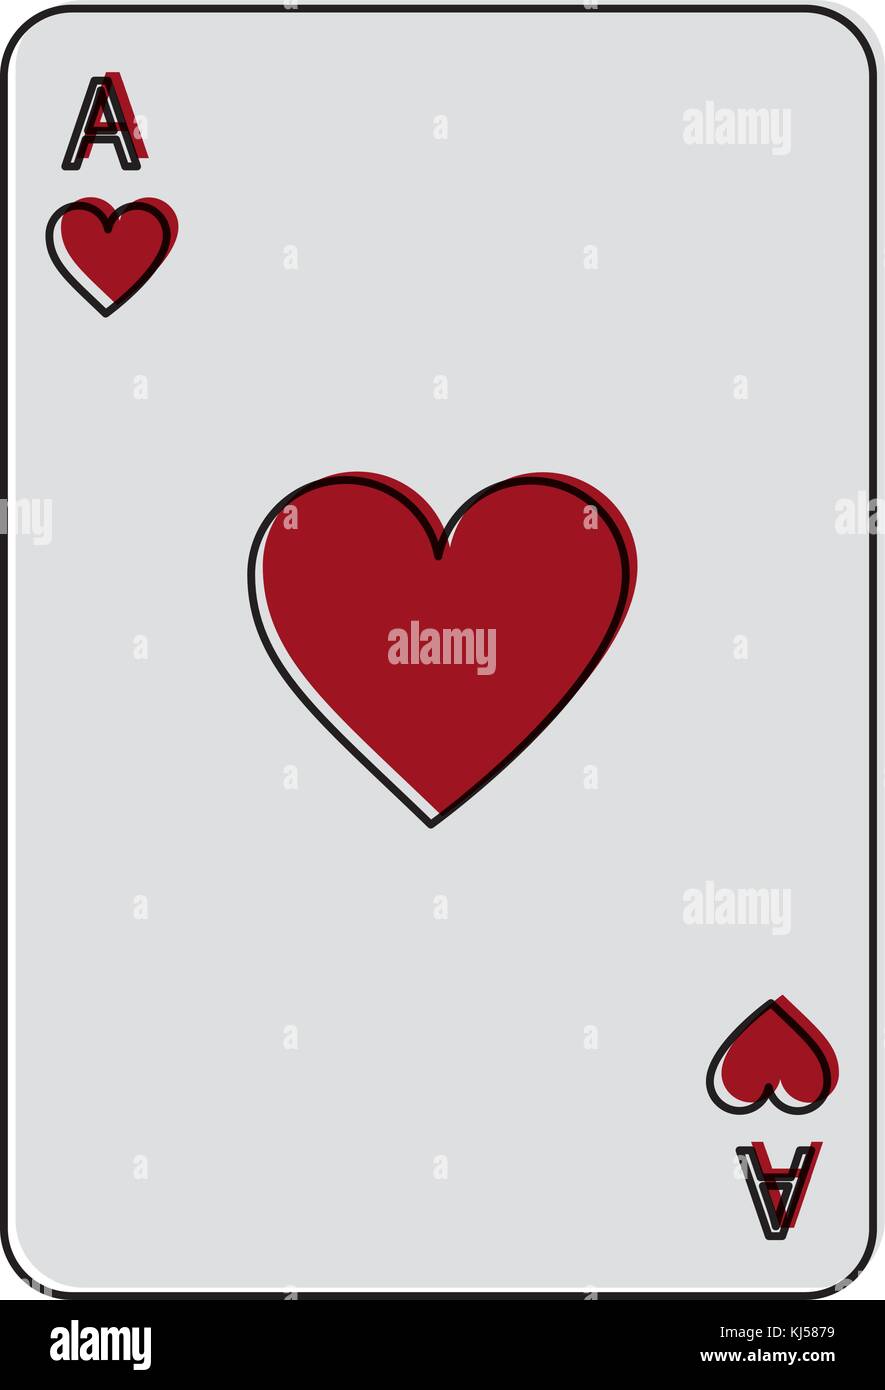 ace of hearts french playing cards related icon image Stock Vector Image &  Art - Alamy